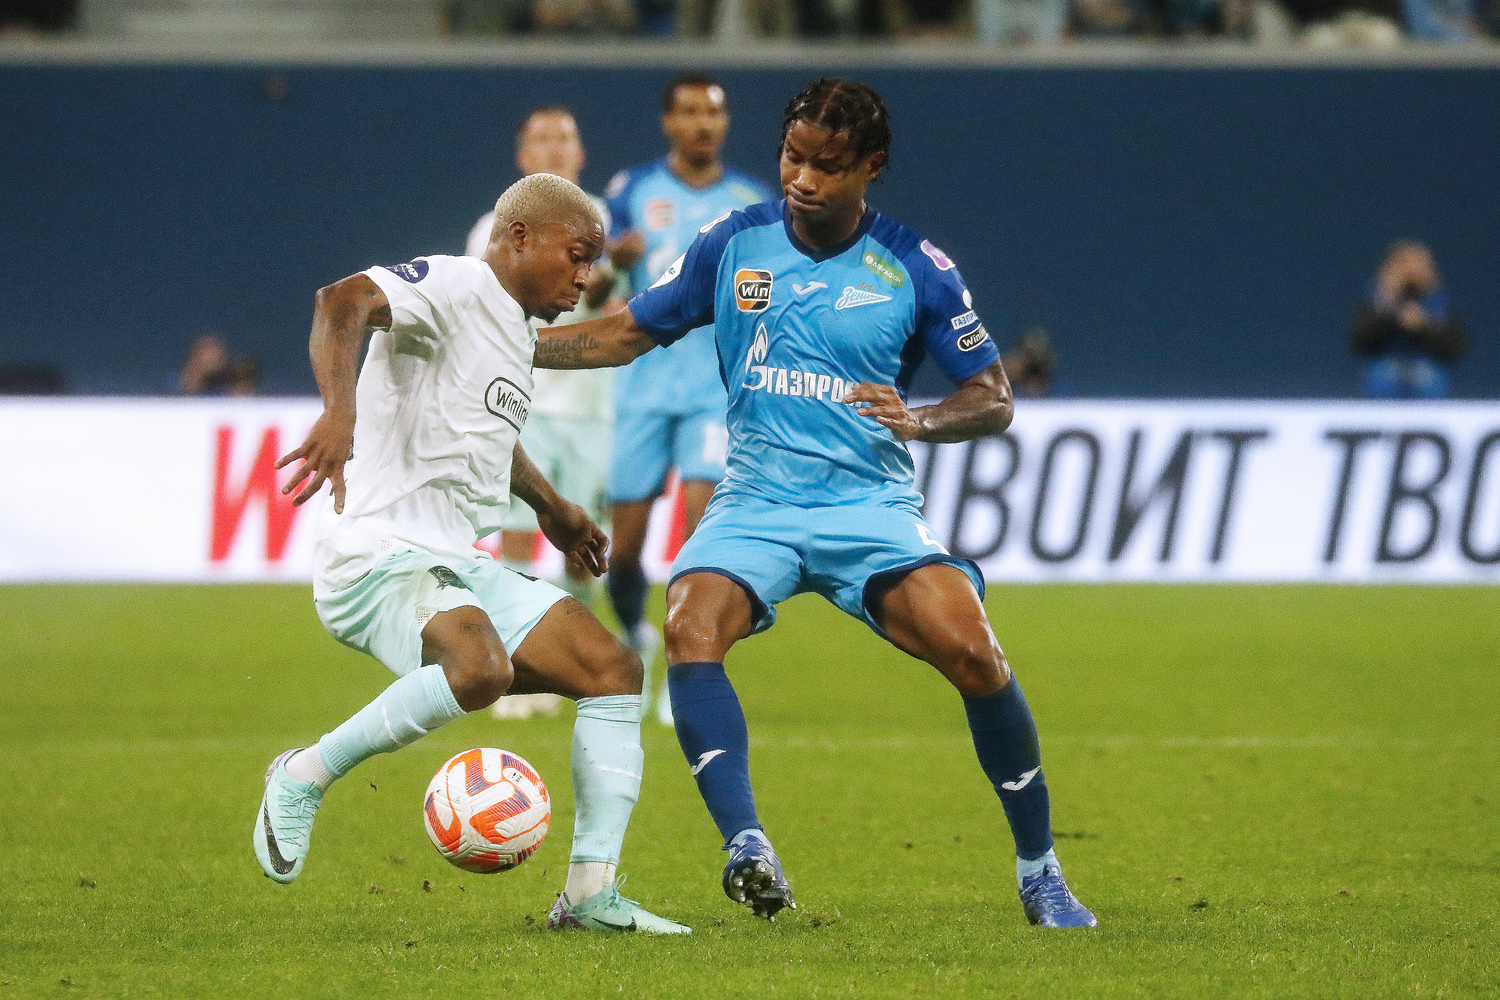 Zenit drew with Krasnodar: how the most attended match of the season went